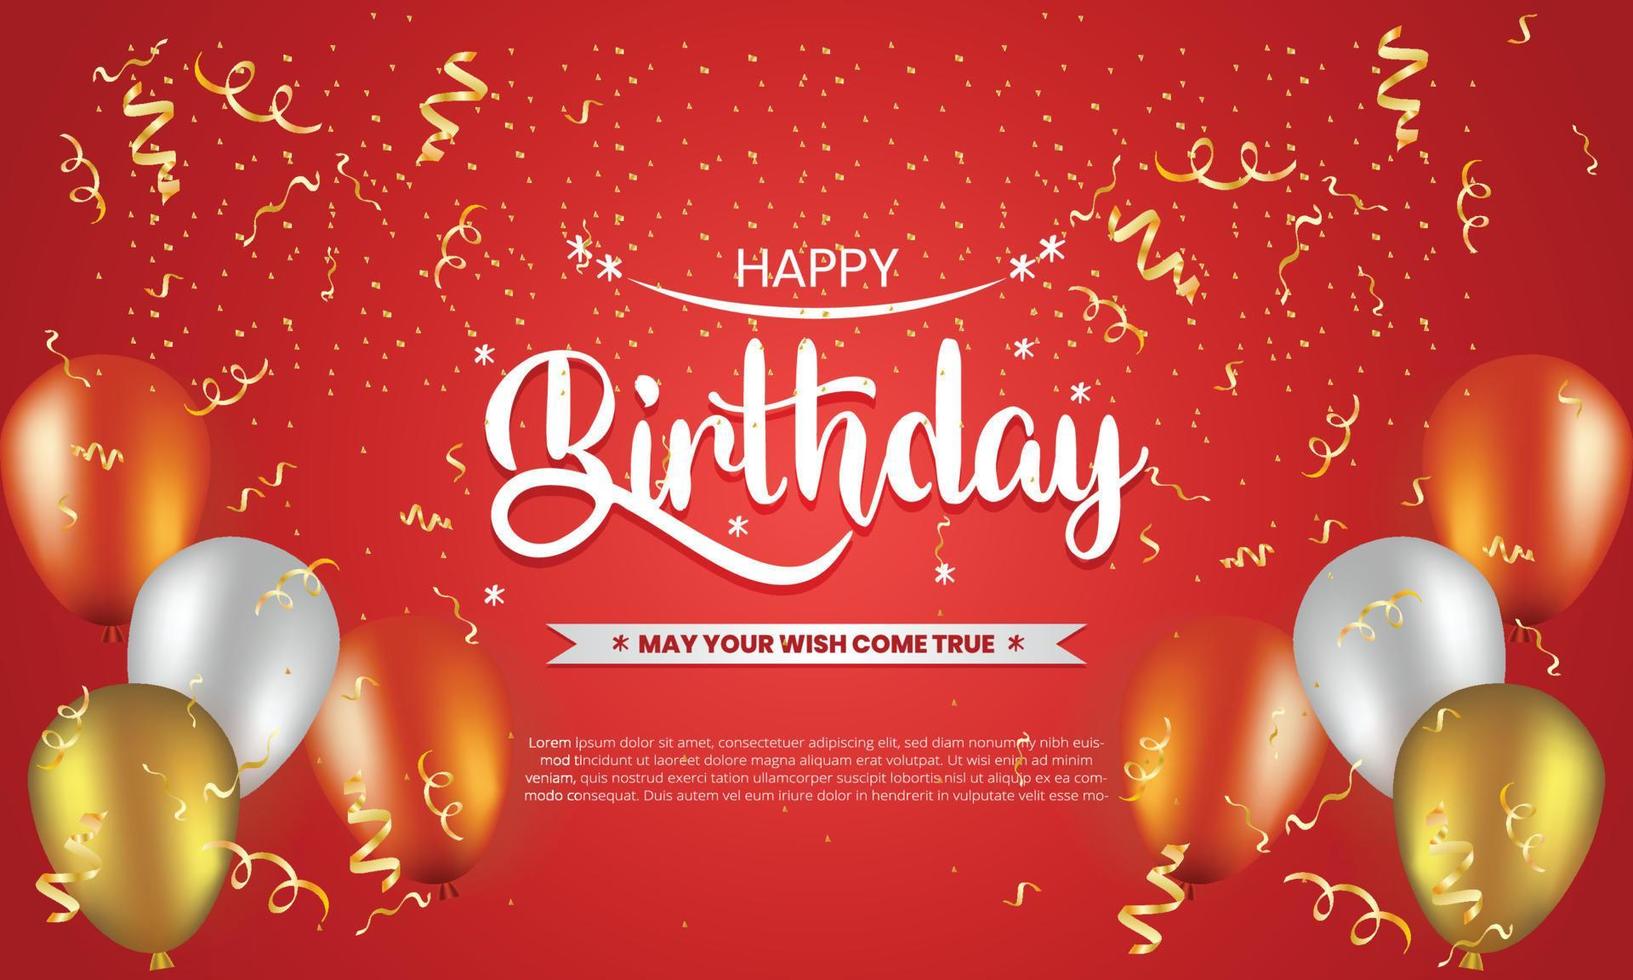 Happy birthday greetings card with balloons, typography and red glitter background vector